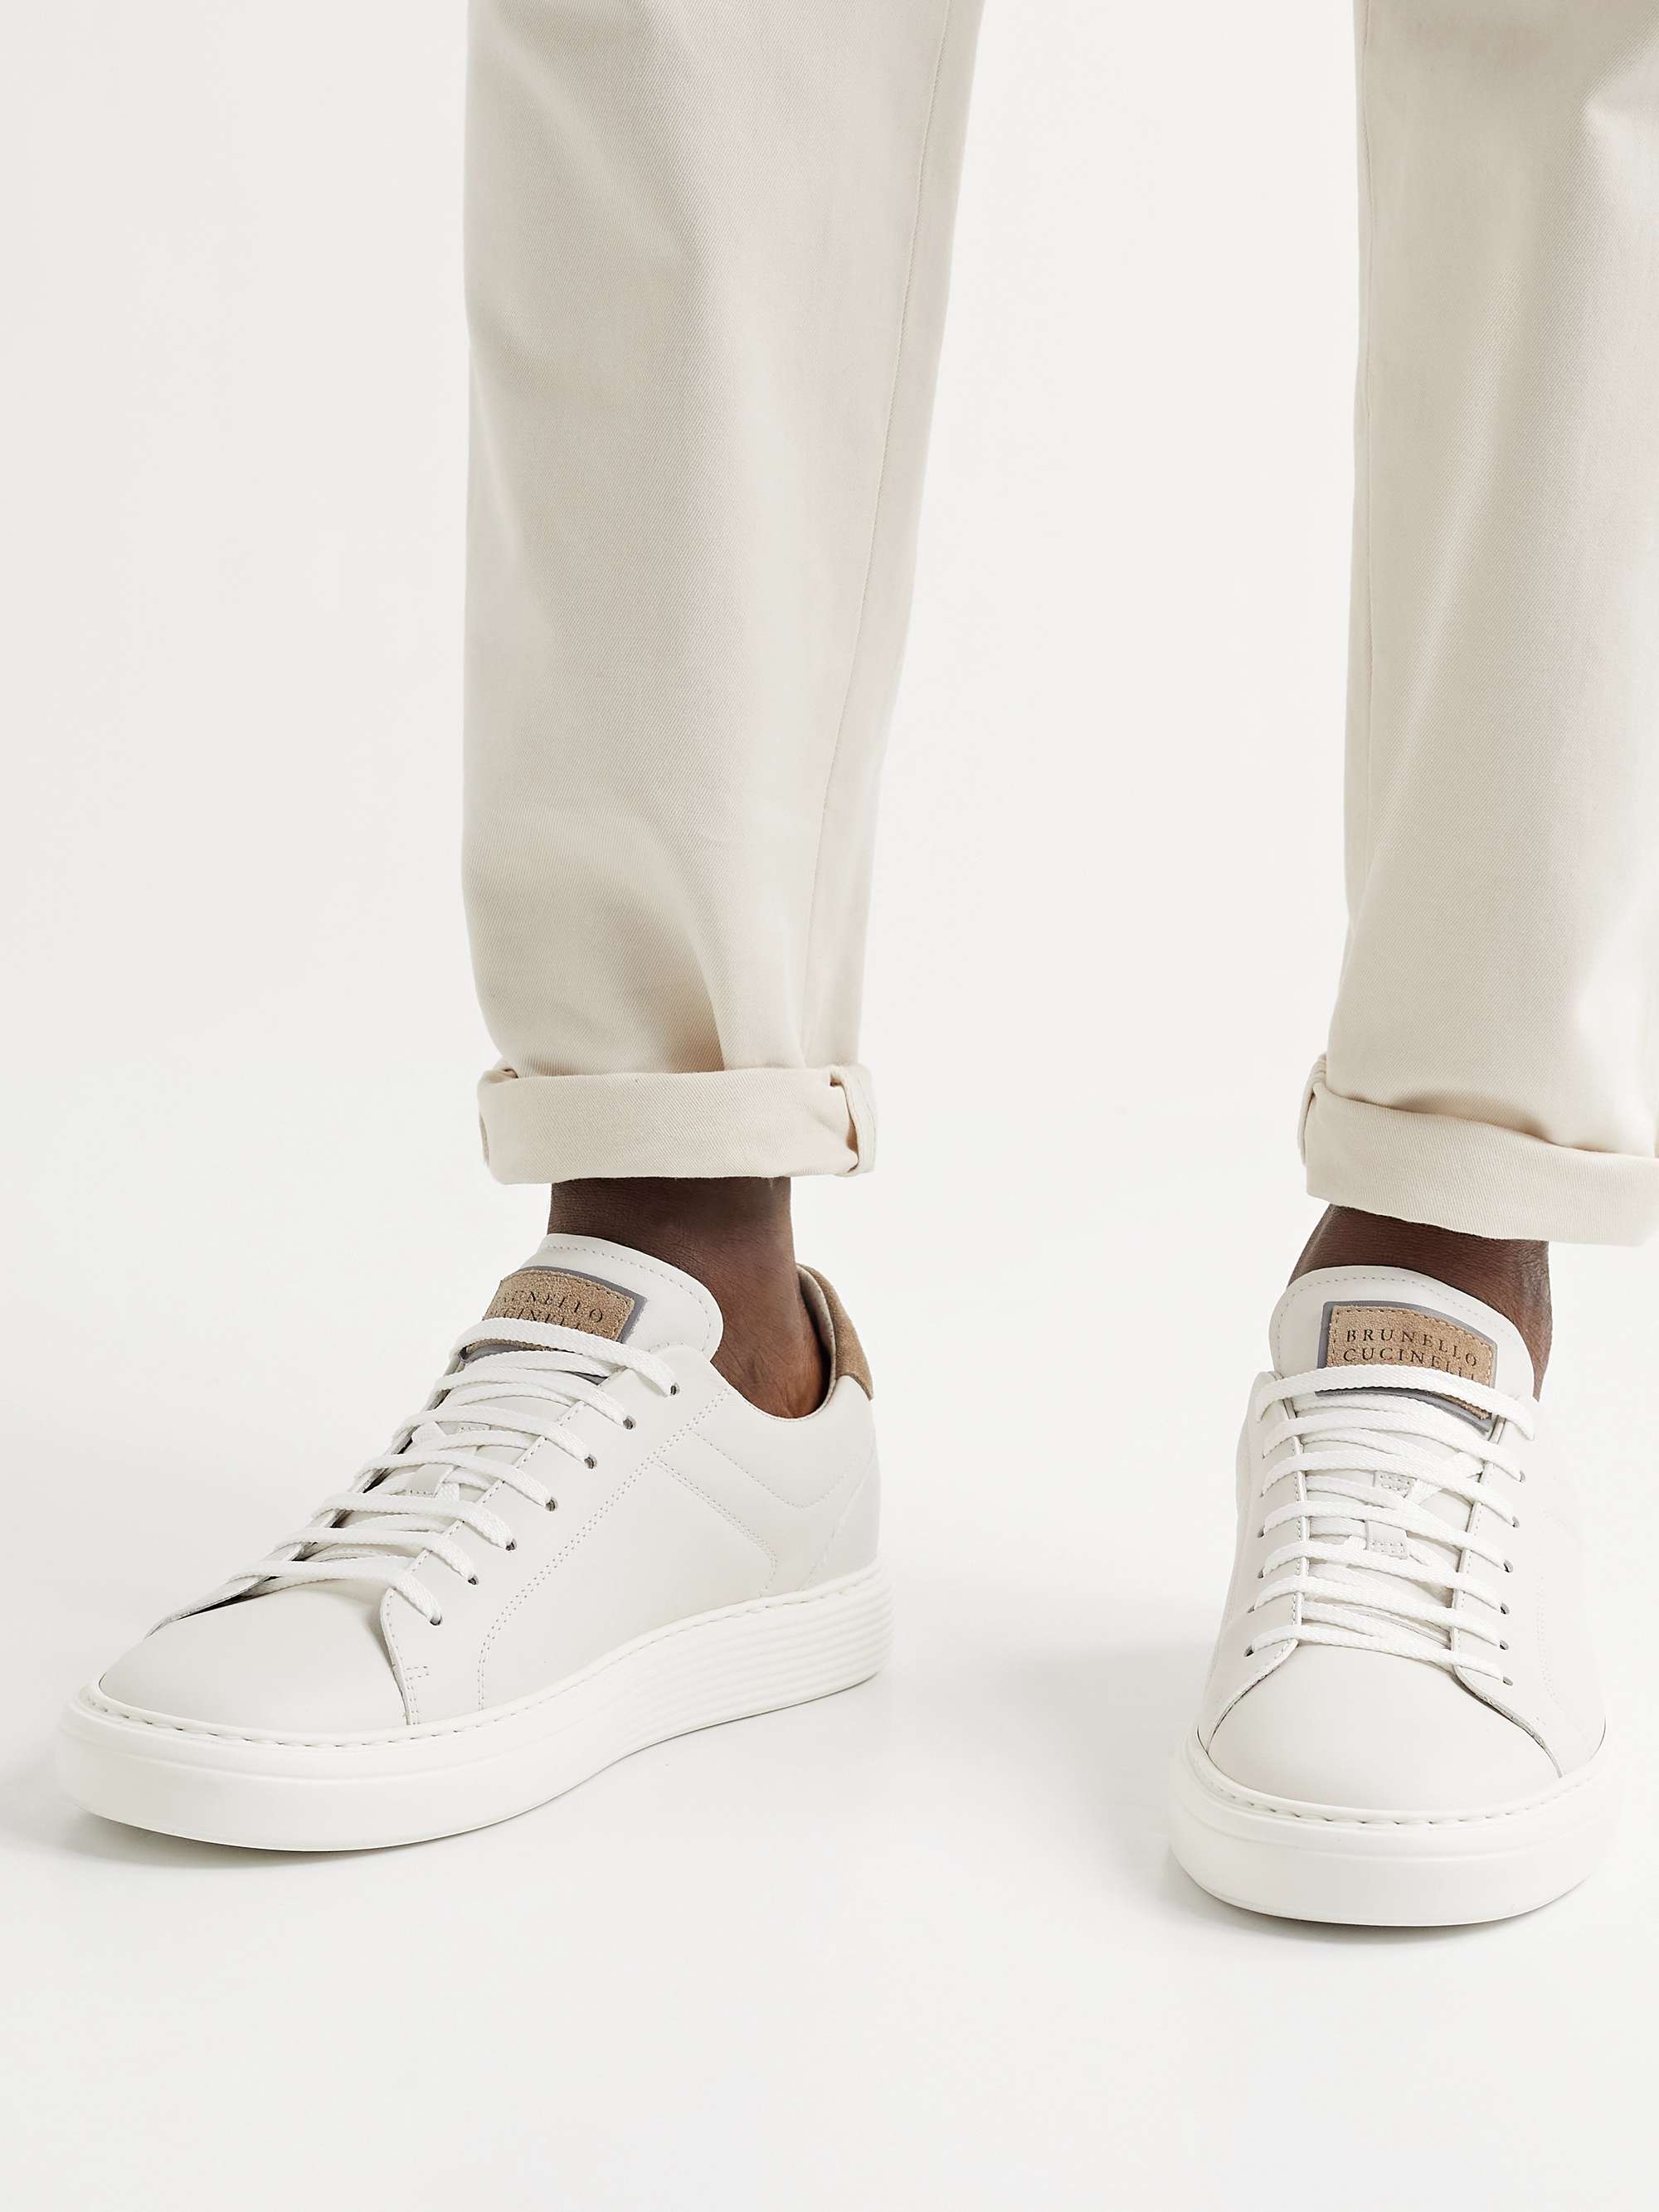 BRUNELLO CUCINELLI Suede-Trimmed Leather Sneakers | MR PORTER